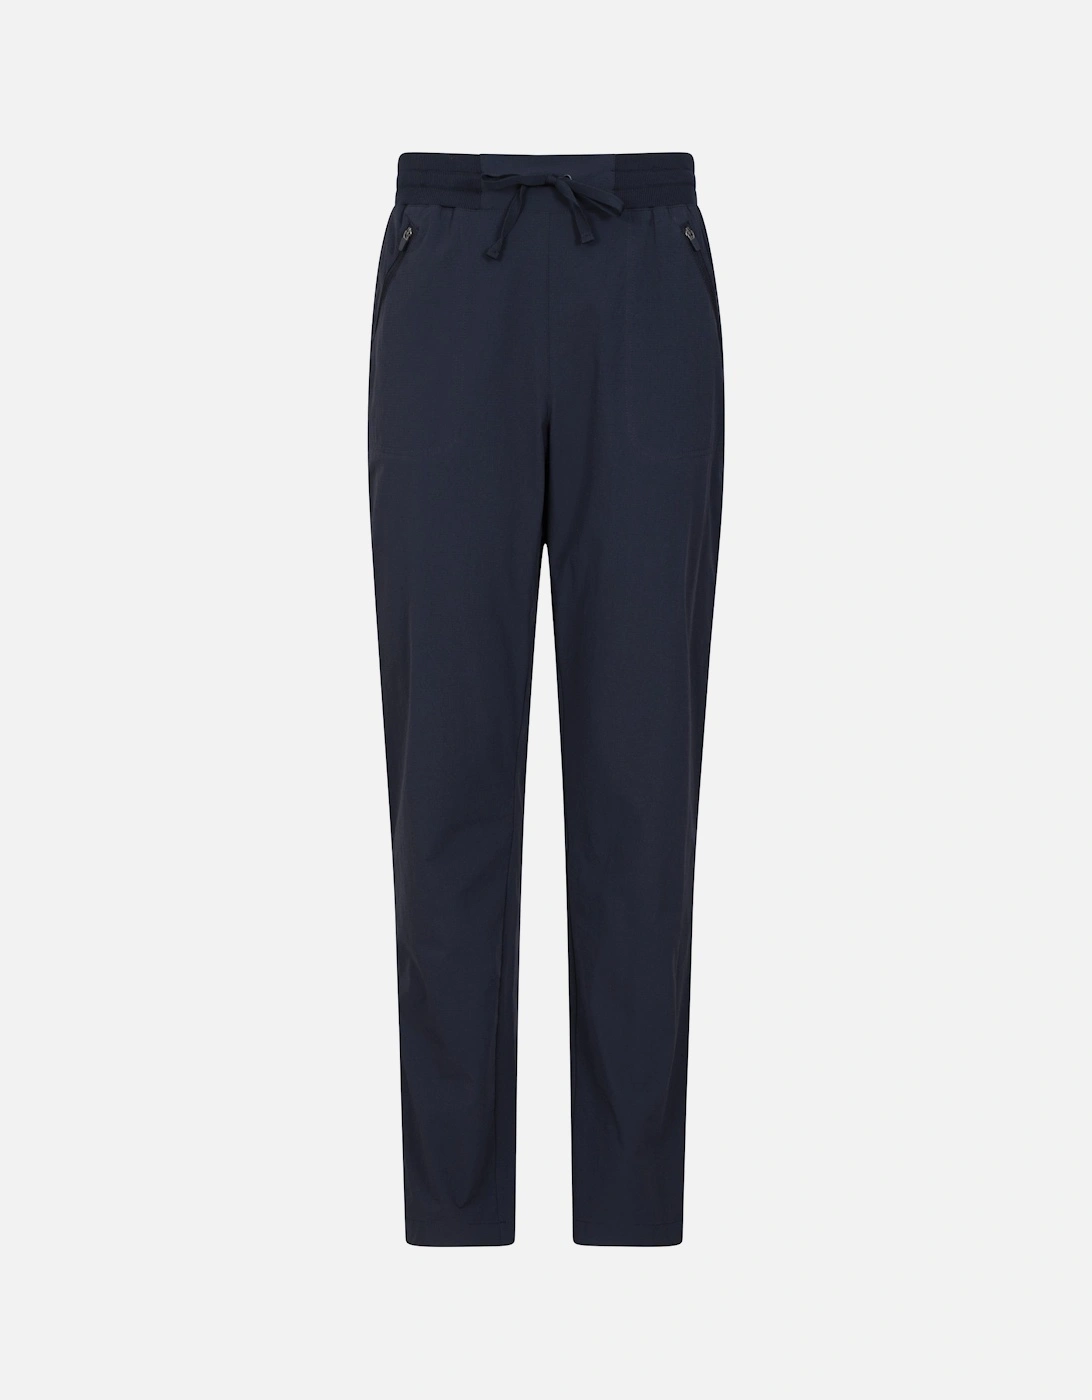 Womens/Ladies Explore Hiking Trousers, 5 of 4